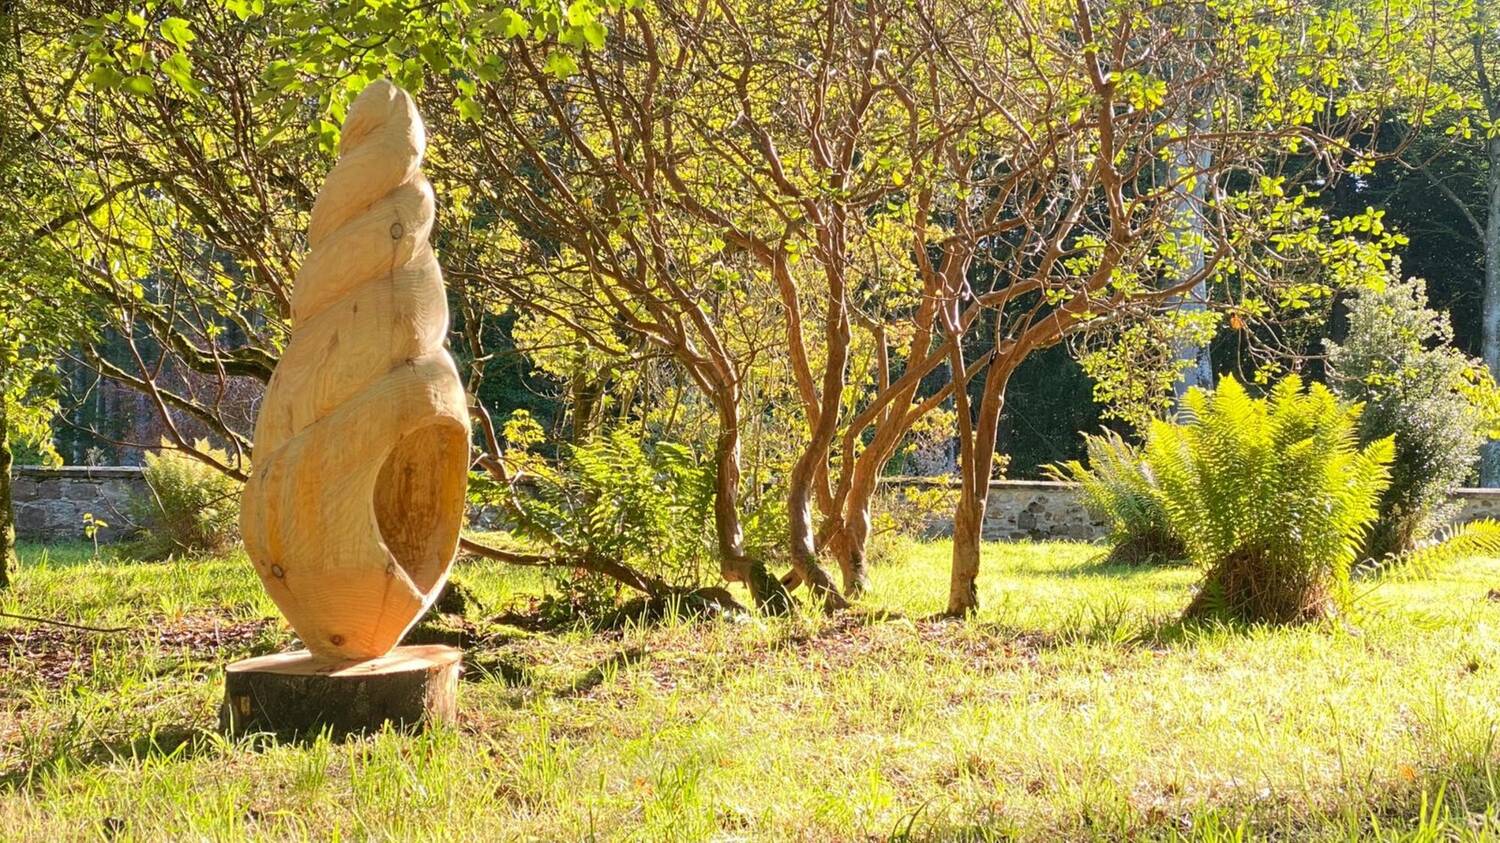 Large wooden sculpture in a woodland shrubbery.